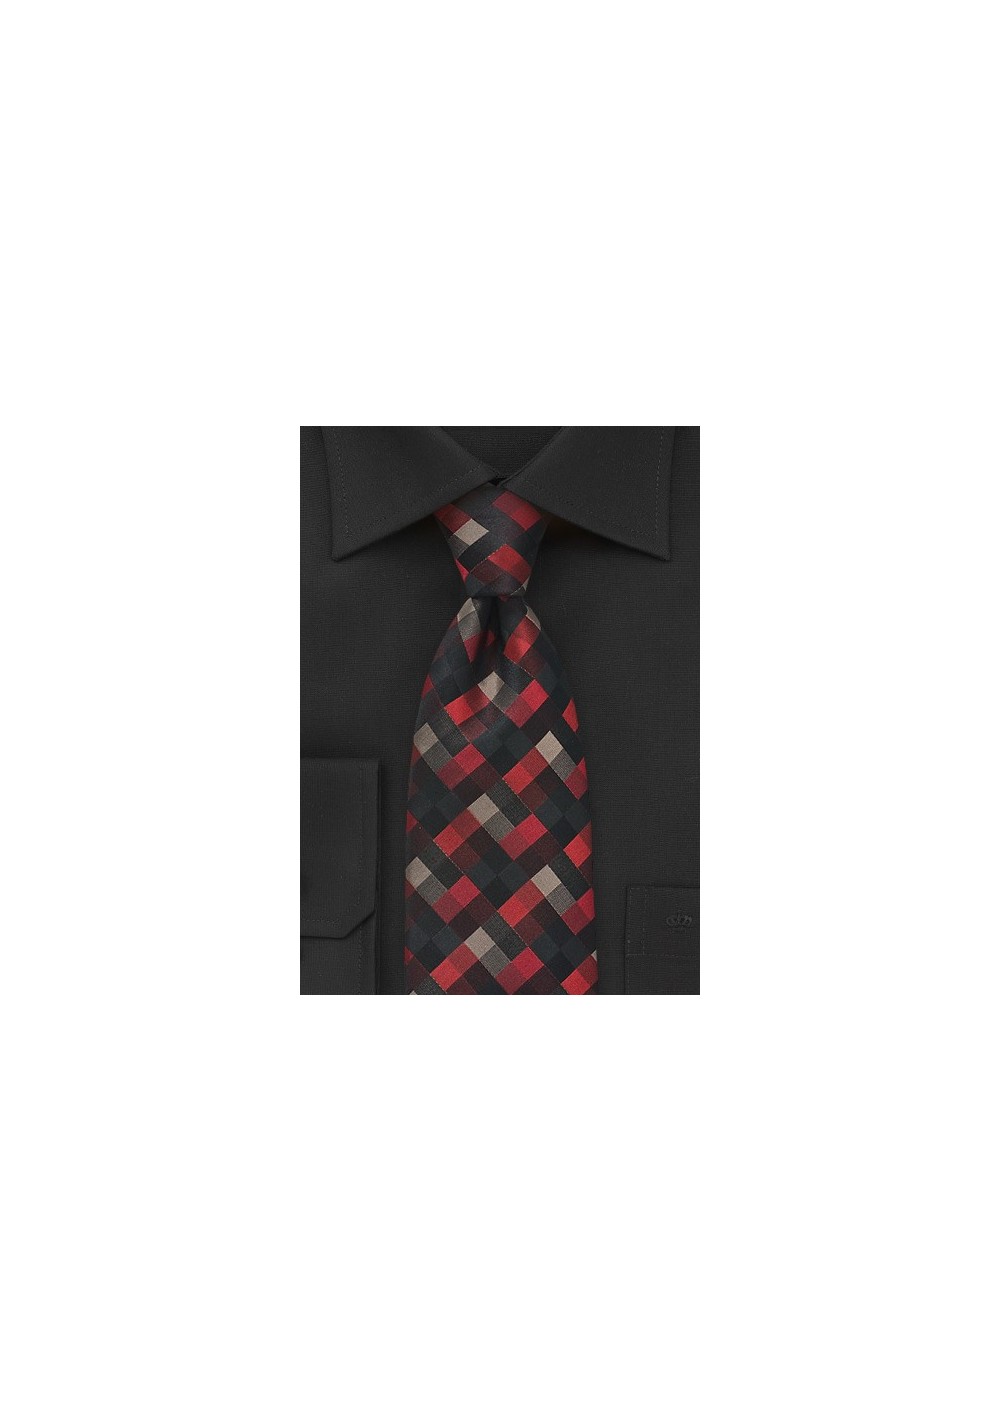 Patchwork Tie in Reds and Blacks